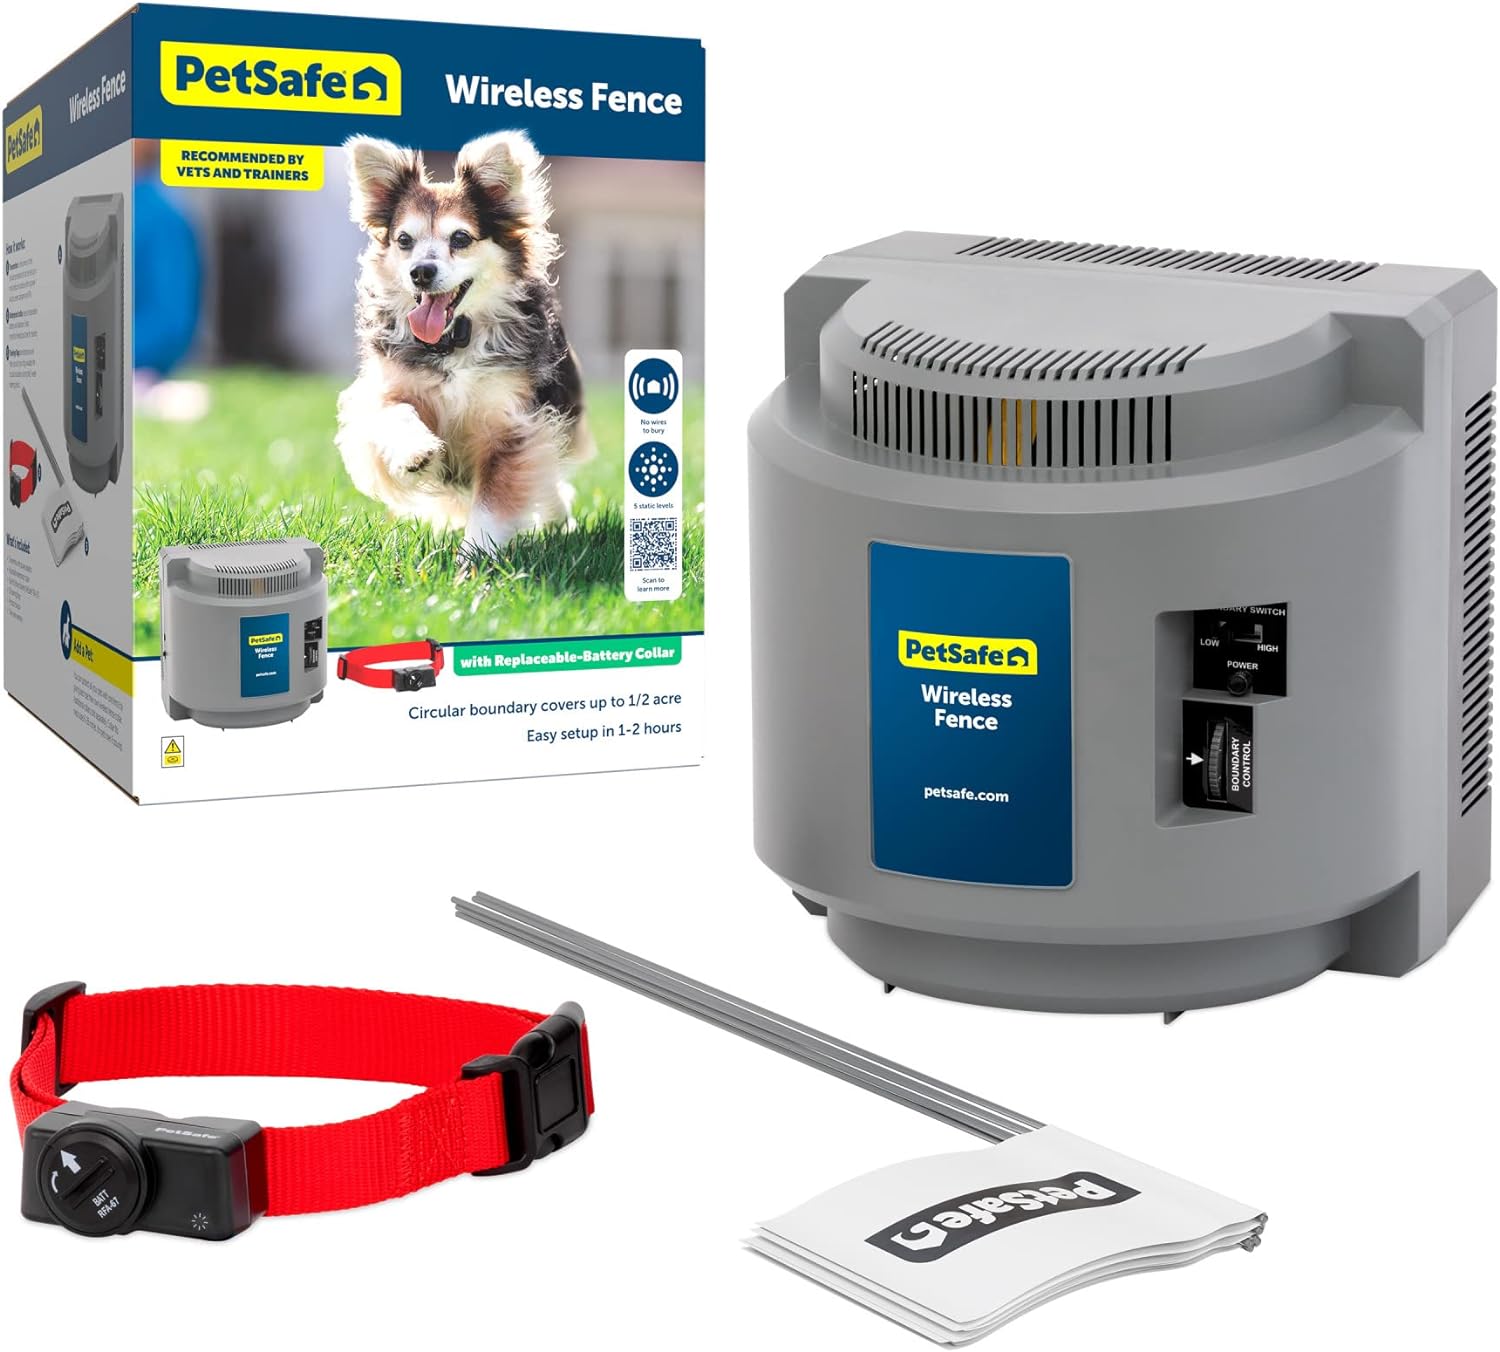 PetSafe Americas Safest Pet Fence - The Original Wireless Containment System - Covers up to 1/2 Acre for dogs 8lbs+, Tone / Static - Parent Company INVISIBLE FENCE Brand